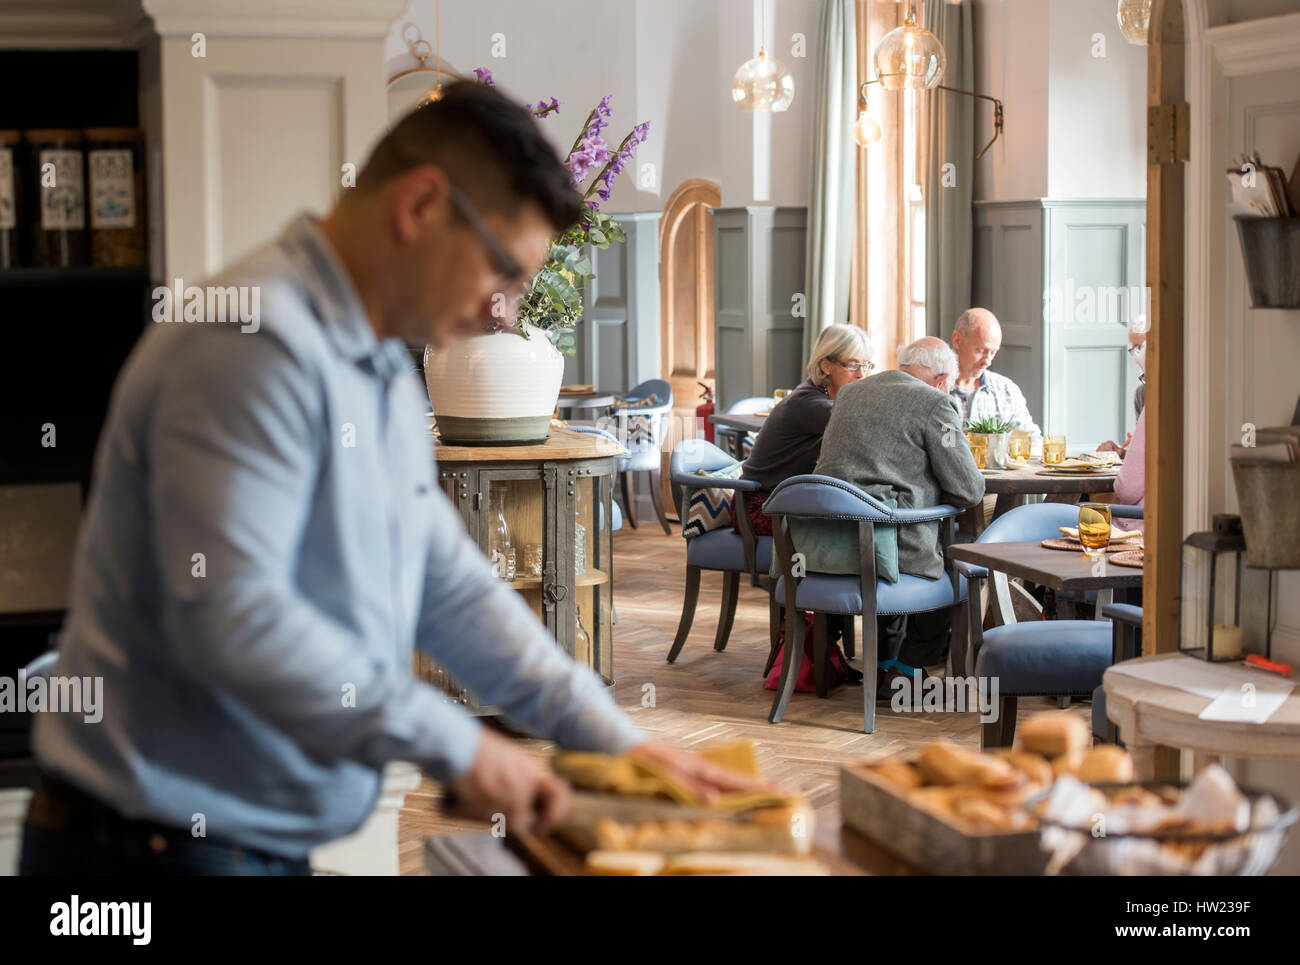 The maitre d’hotel preparing bread while a group of retired people have lunch at The Painswick, near Stroud, Gloucestershire UK Stock Photo